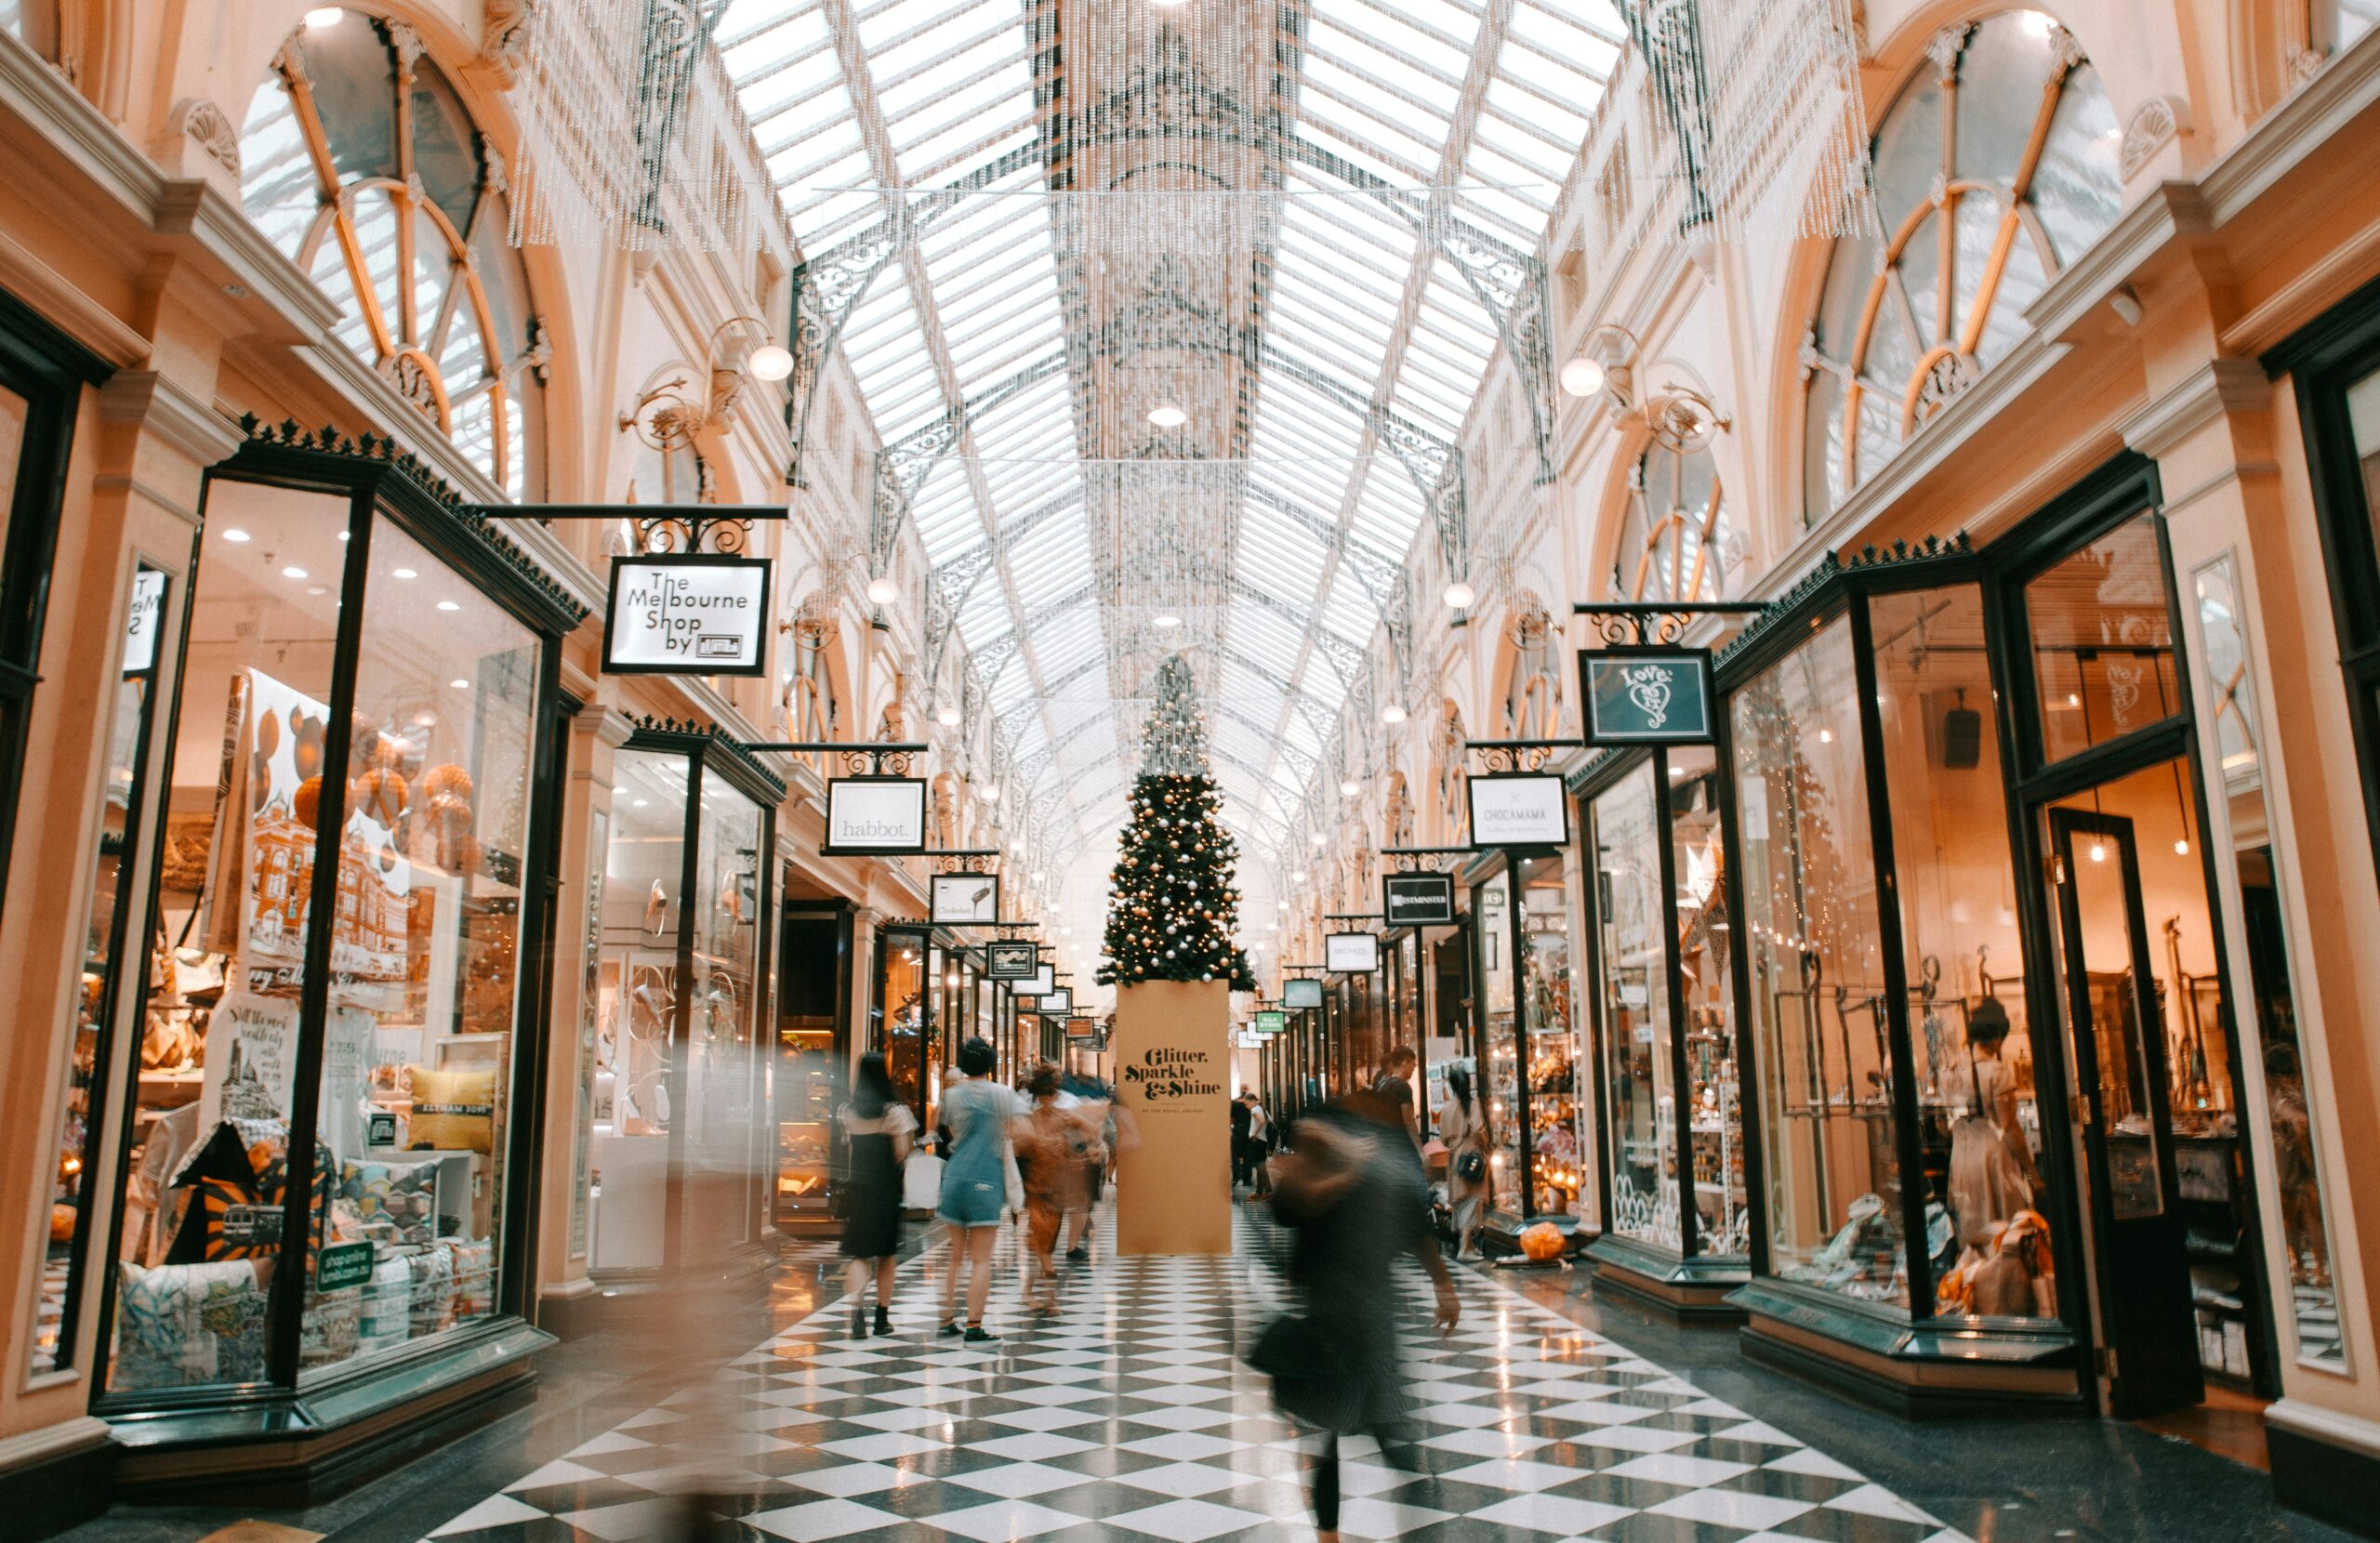 Sensory experiences in retail shopping